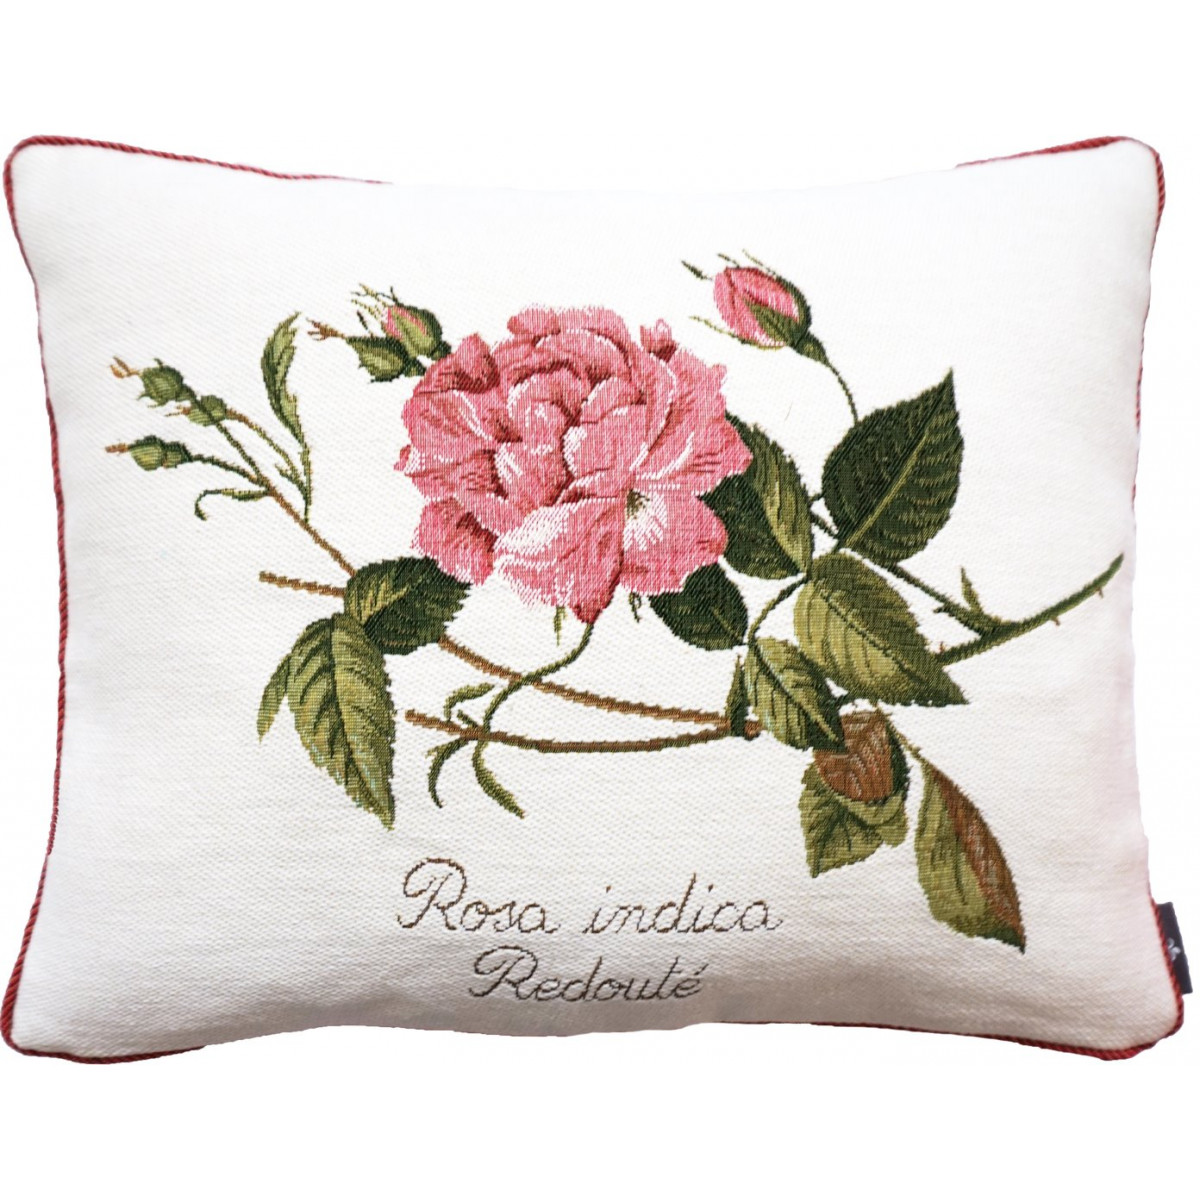 Coussin rectangulaire rosa indica made in france blanc 38x48